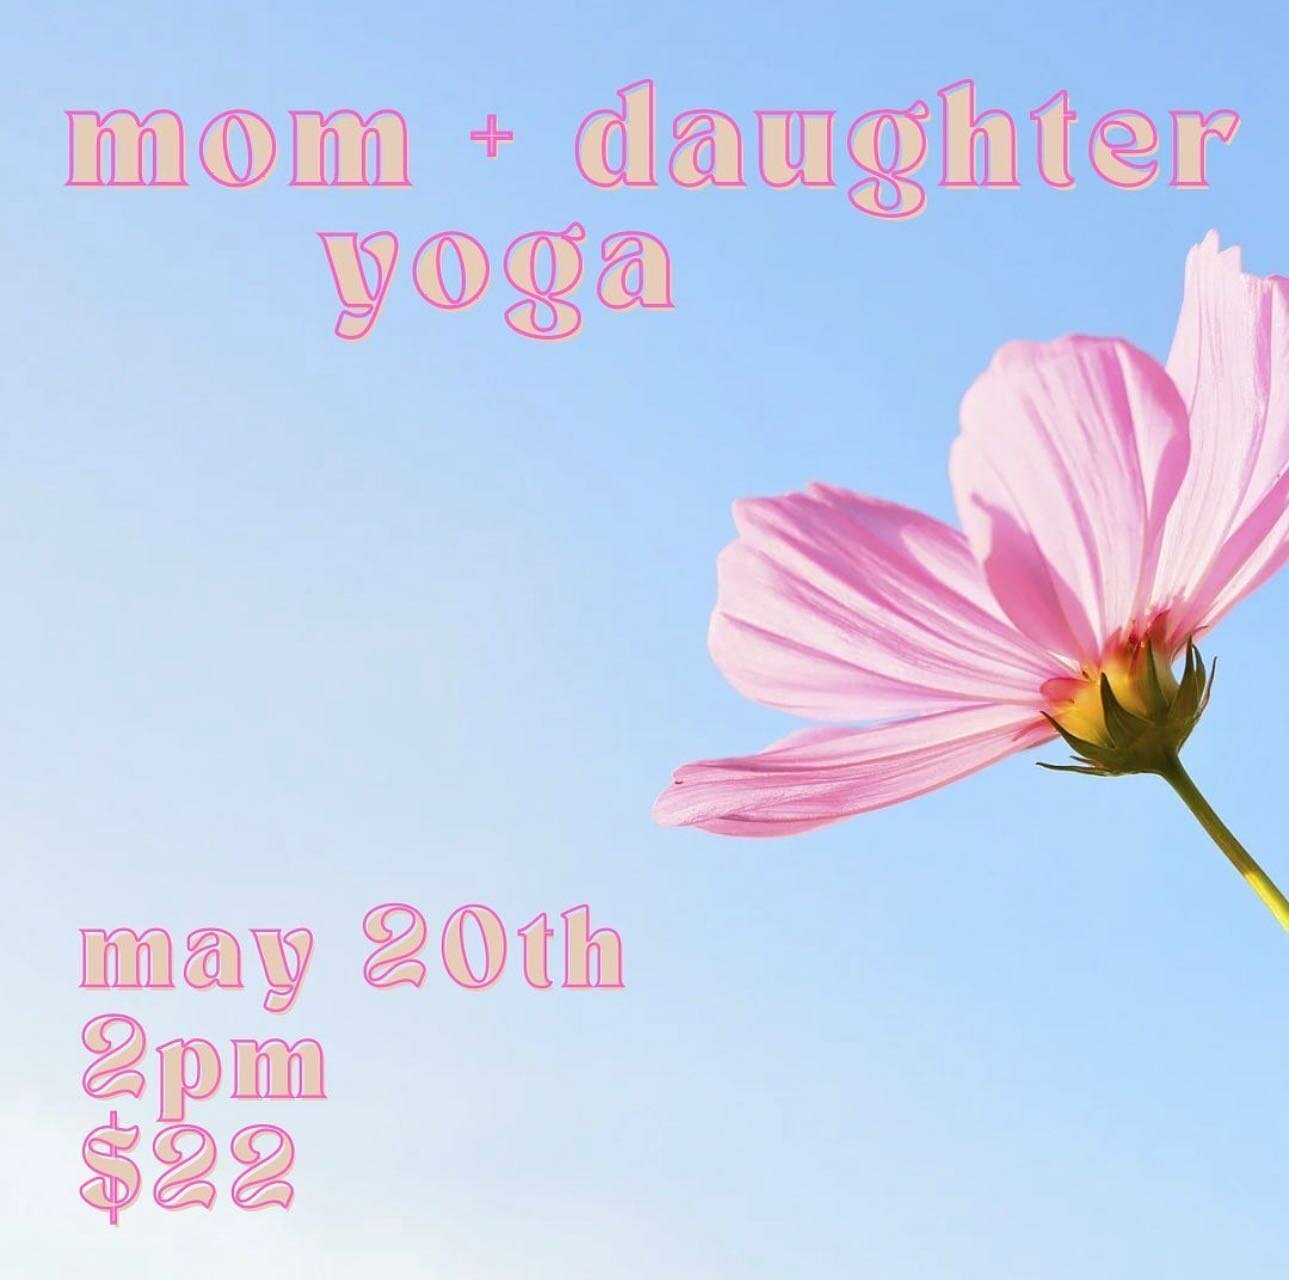 Mark your calendars! 

mom + daughter yoga
May 20th 2pm $22 for both mom + daughter

Moms, daughters, sisters, grandmothers, nieces and aunts! Come join @spacedispatch on May 20th, at 2pm for a 60 minute all levels class, led by Rachel White. You and